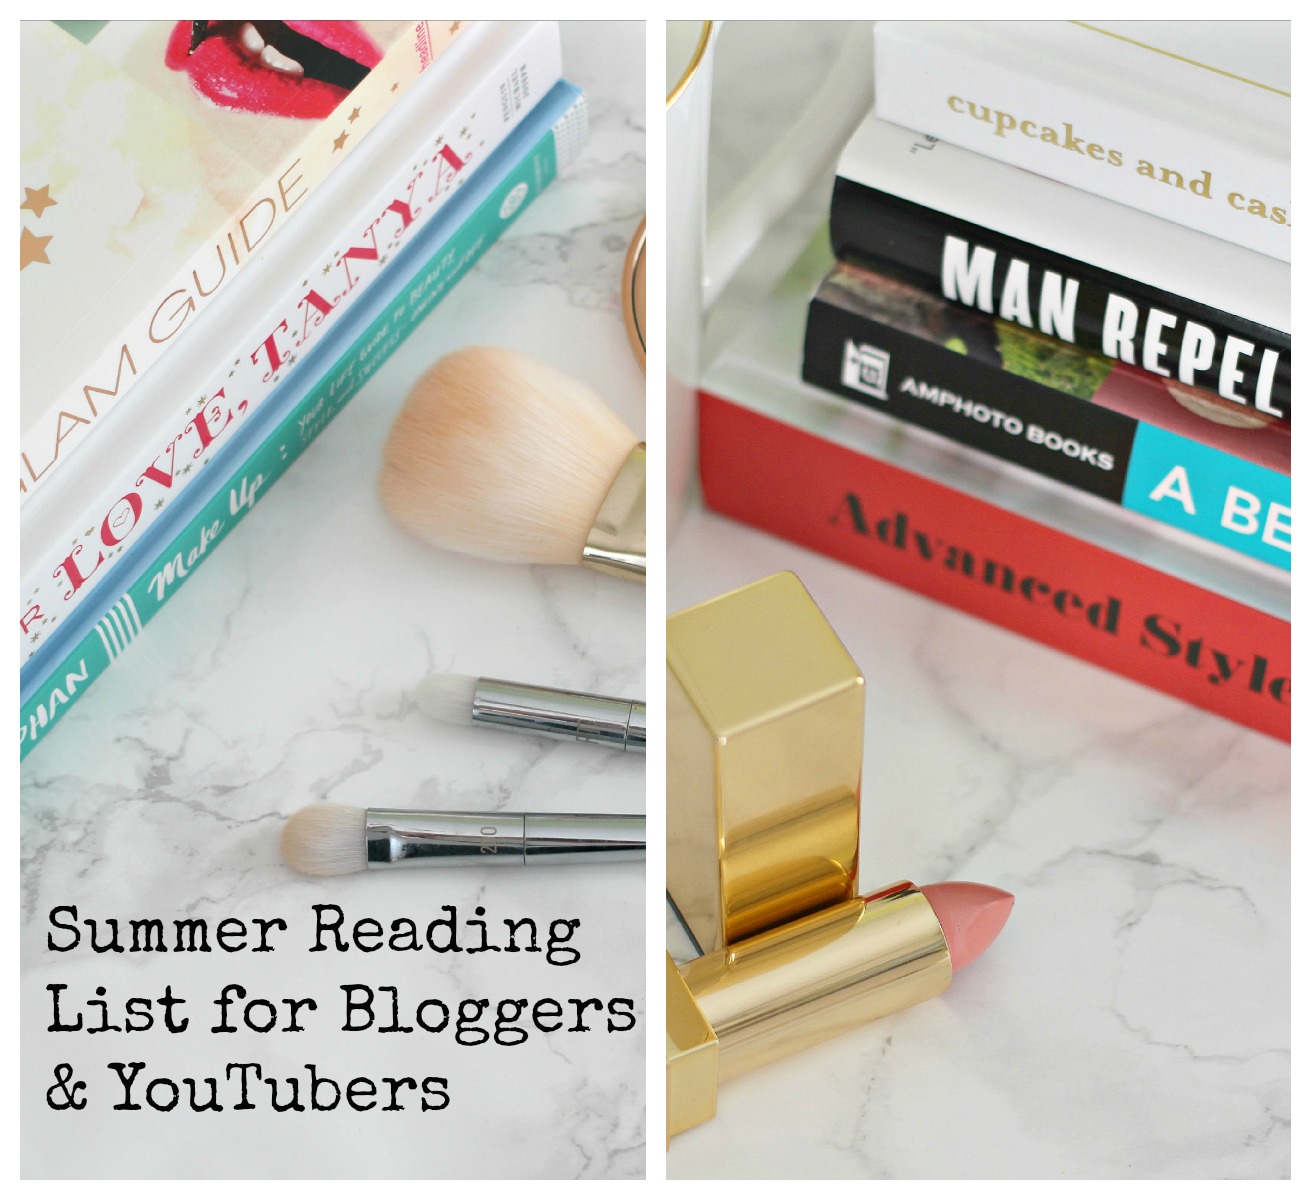 Summer Reading List for Bloggers & YouTubers